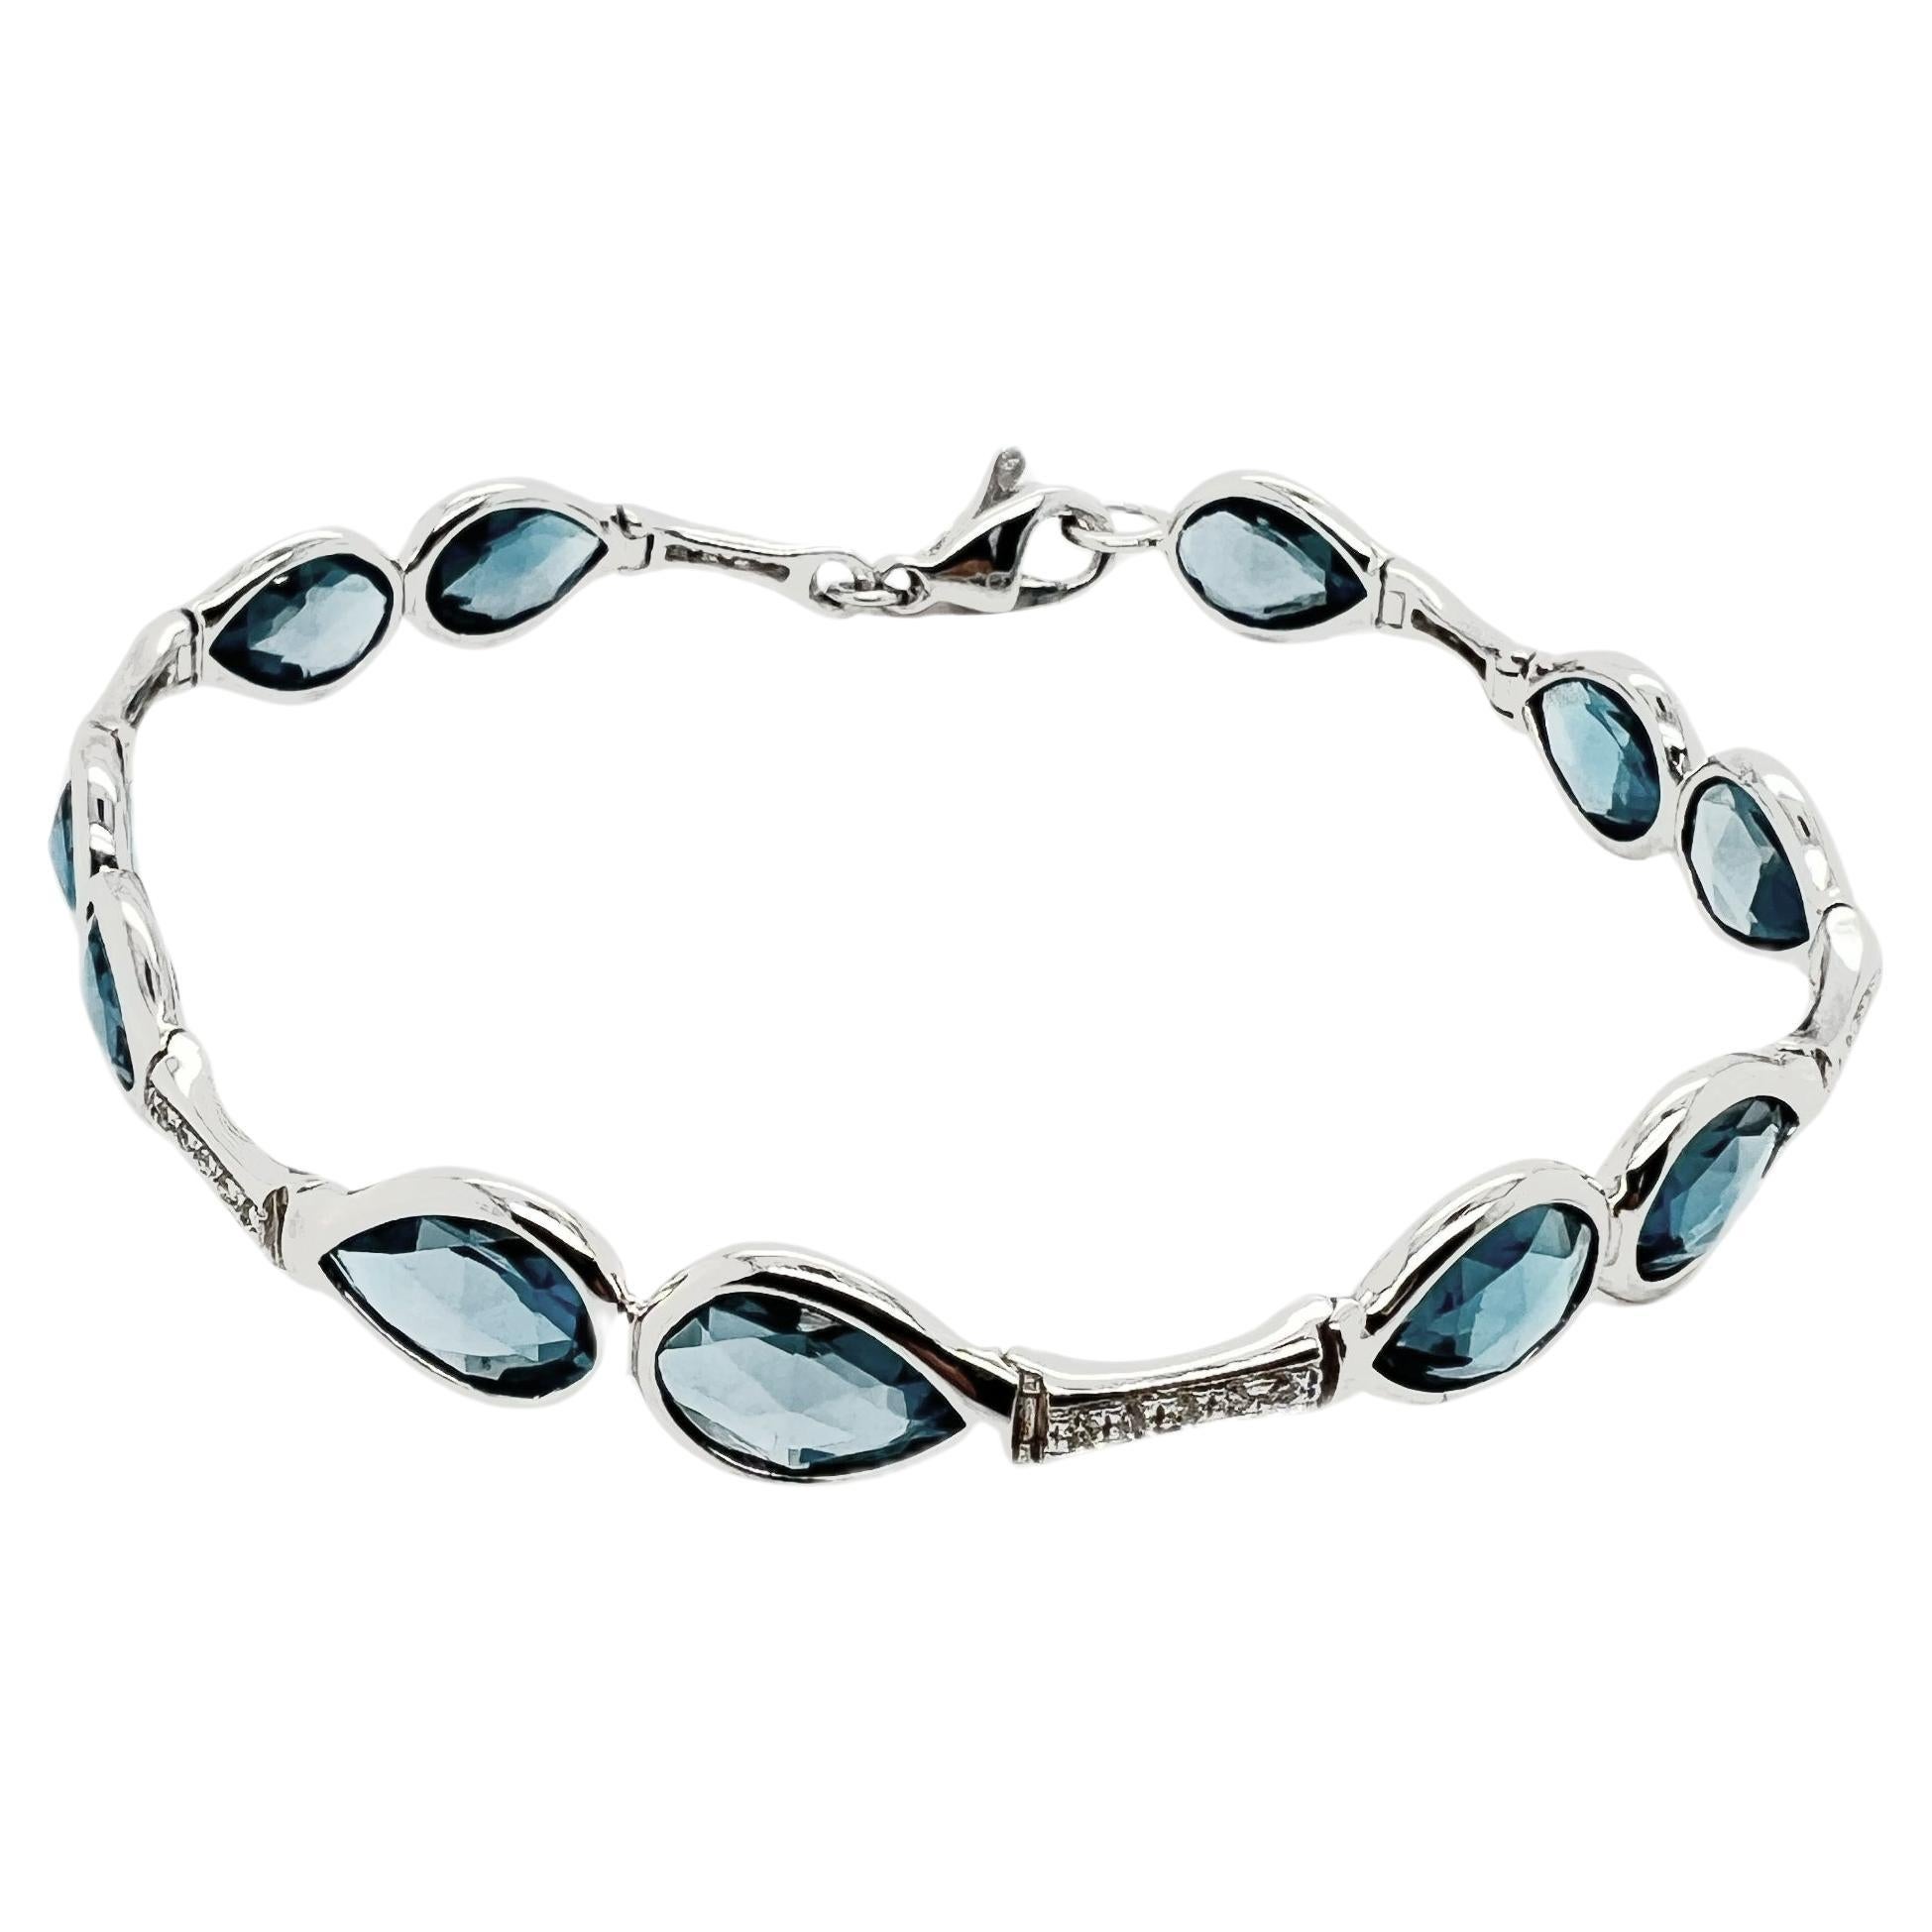 Bracelet in 18k gold with Diamonds and Blue Topaz drops